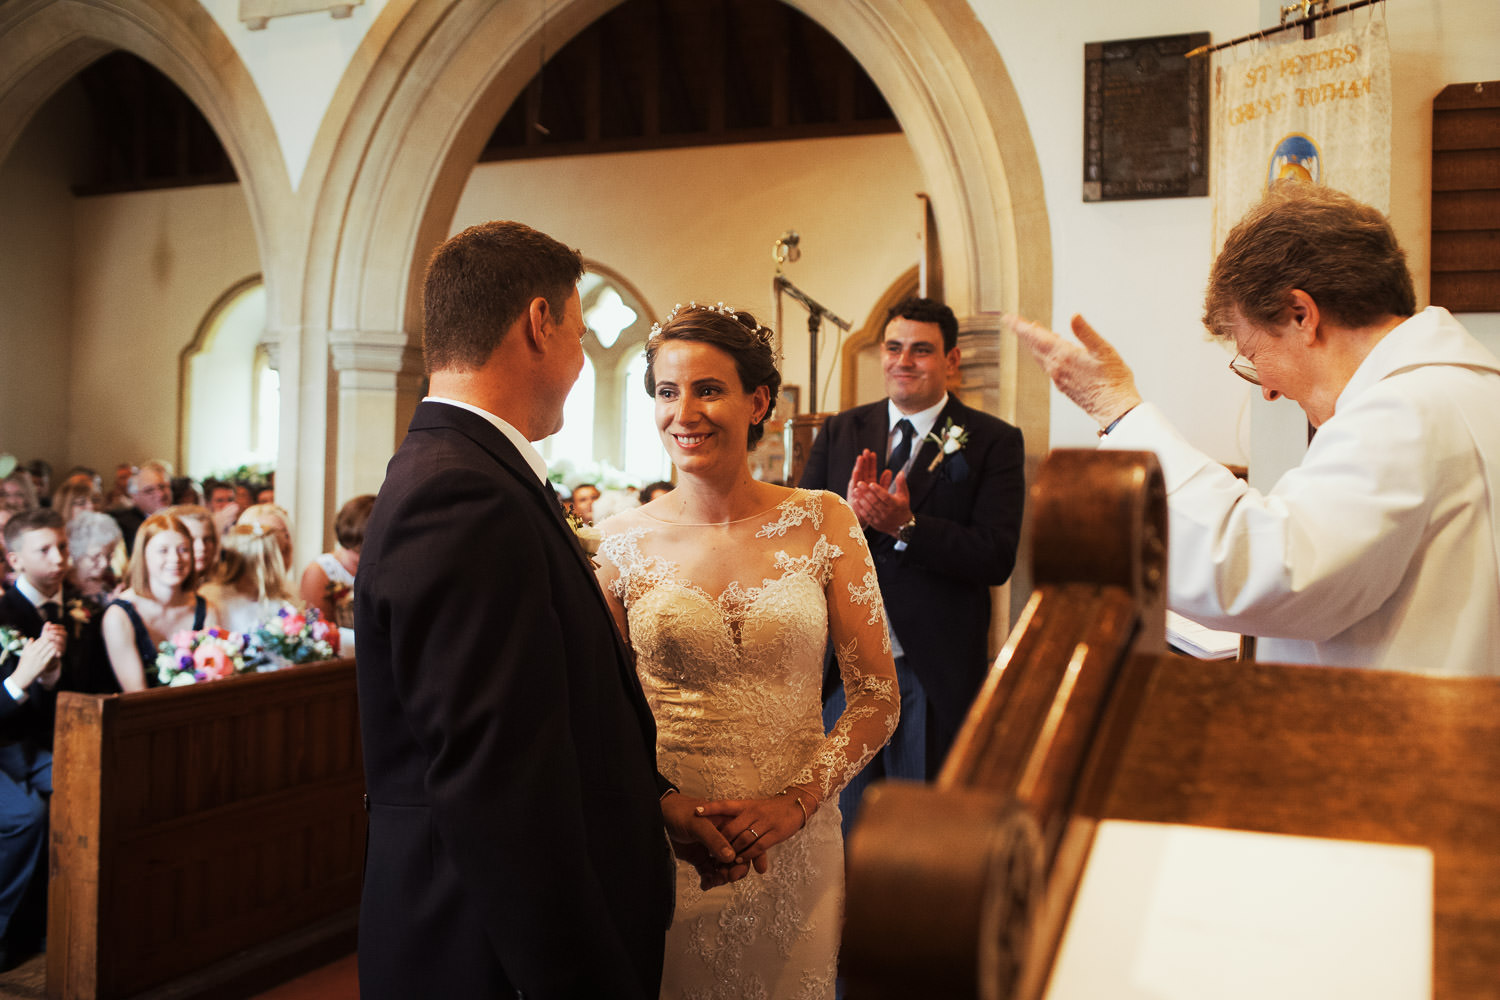 Bride and groom taking vows in the church in Great Totham near Maldon.